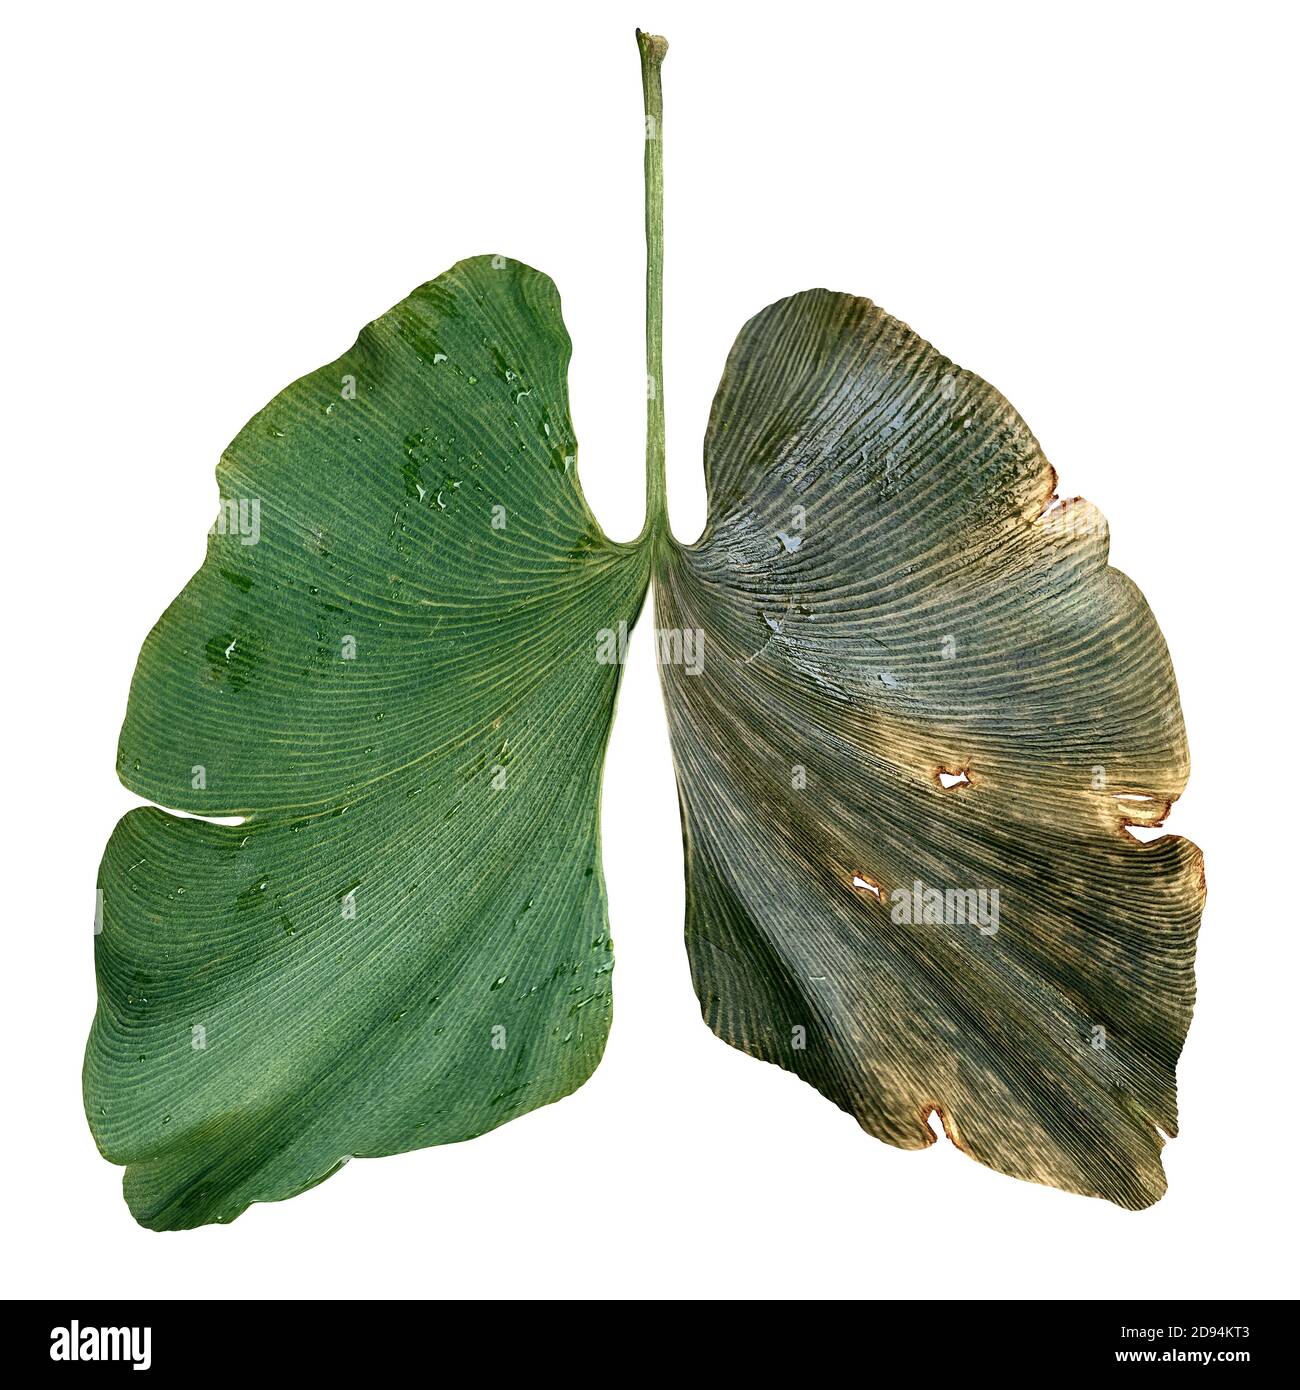 Environmental air pollution and ecological lungs damaged by industry as an environm and forestry conservation concept or dirty air symbol. Stock Photo